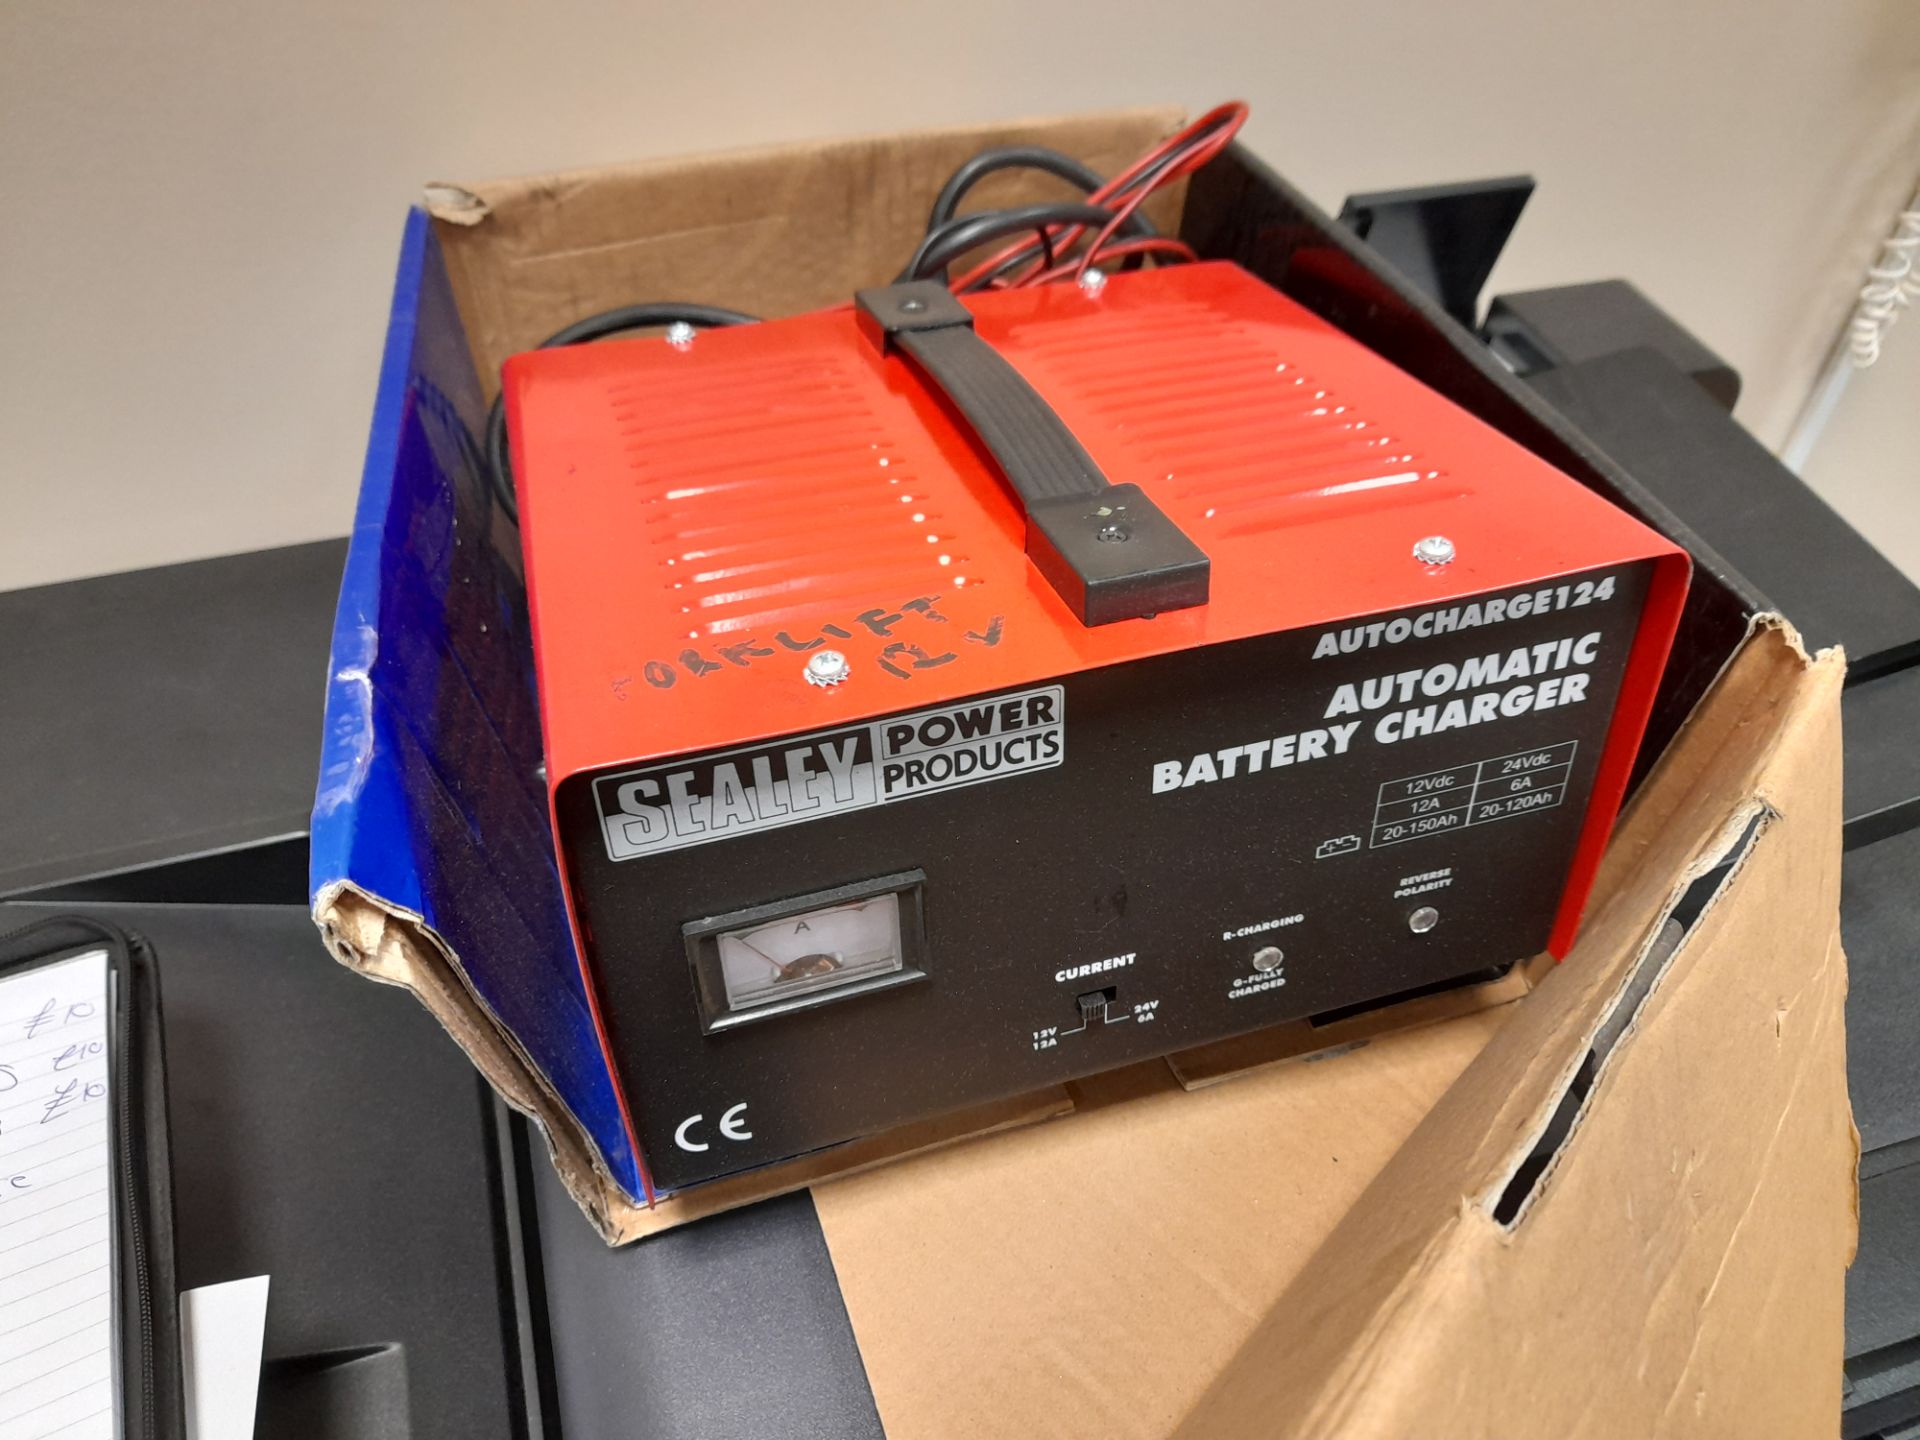 Sealey AutoCharger 124 6/12 Amp 12/24V electronic battery charger - Image 2 of 2